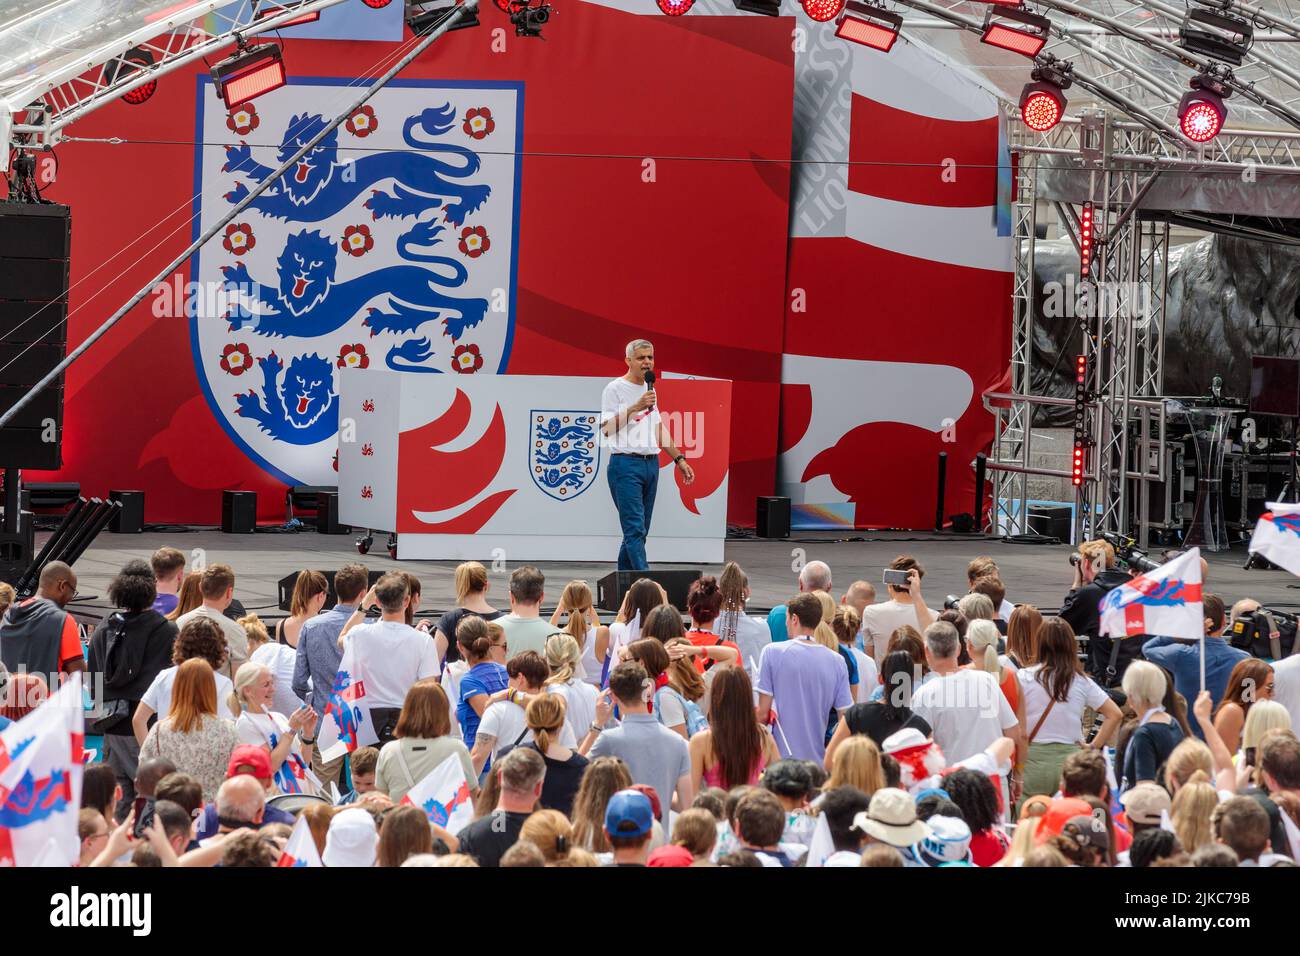 Trafalgar Square, London, UK. 1st August 2022. London Mayor, Sadiq Khan, on stage to welcome Englands Womens winning Football team, along with their manager, Sarina Wiegman. 7,000 football fans gathered in Trafalgar Square for a fan party to celebrate Englands Lionesses historic 2-1 victory over Germany in the UEFA Womens Euro Final at Wembley Stadium yesterday.  Amanda Rose/Alamy Live News Stock Photo